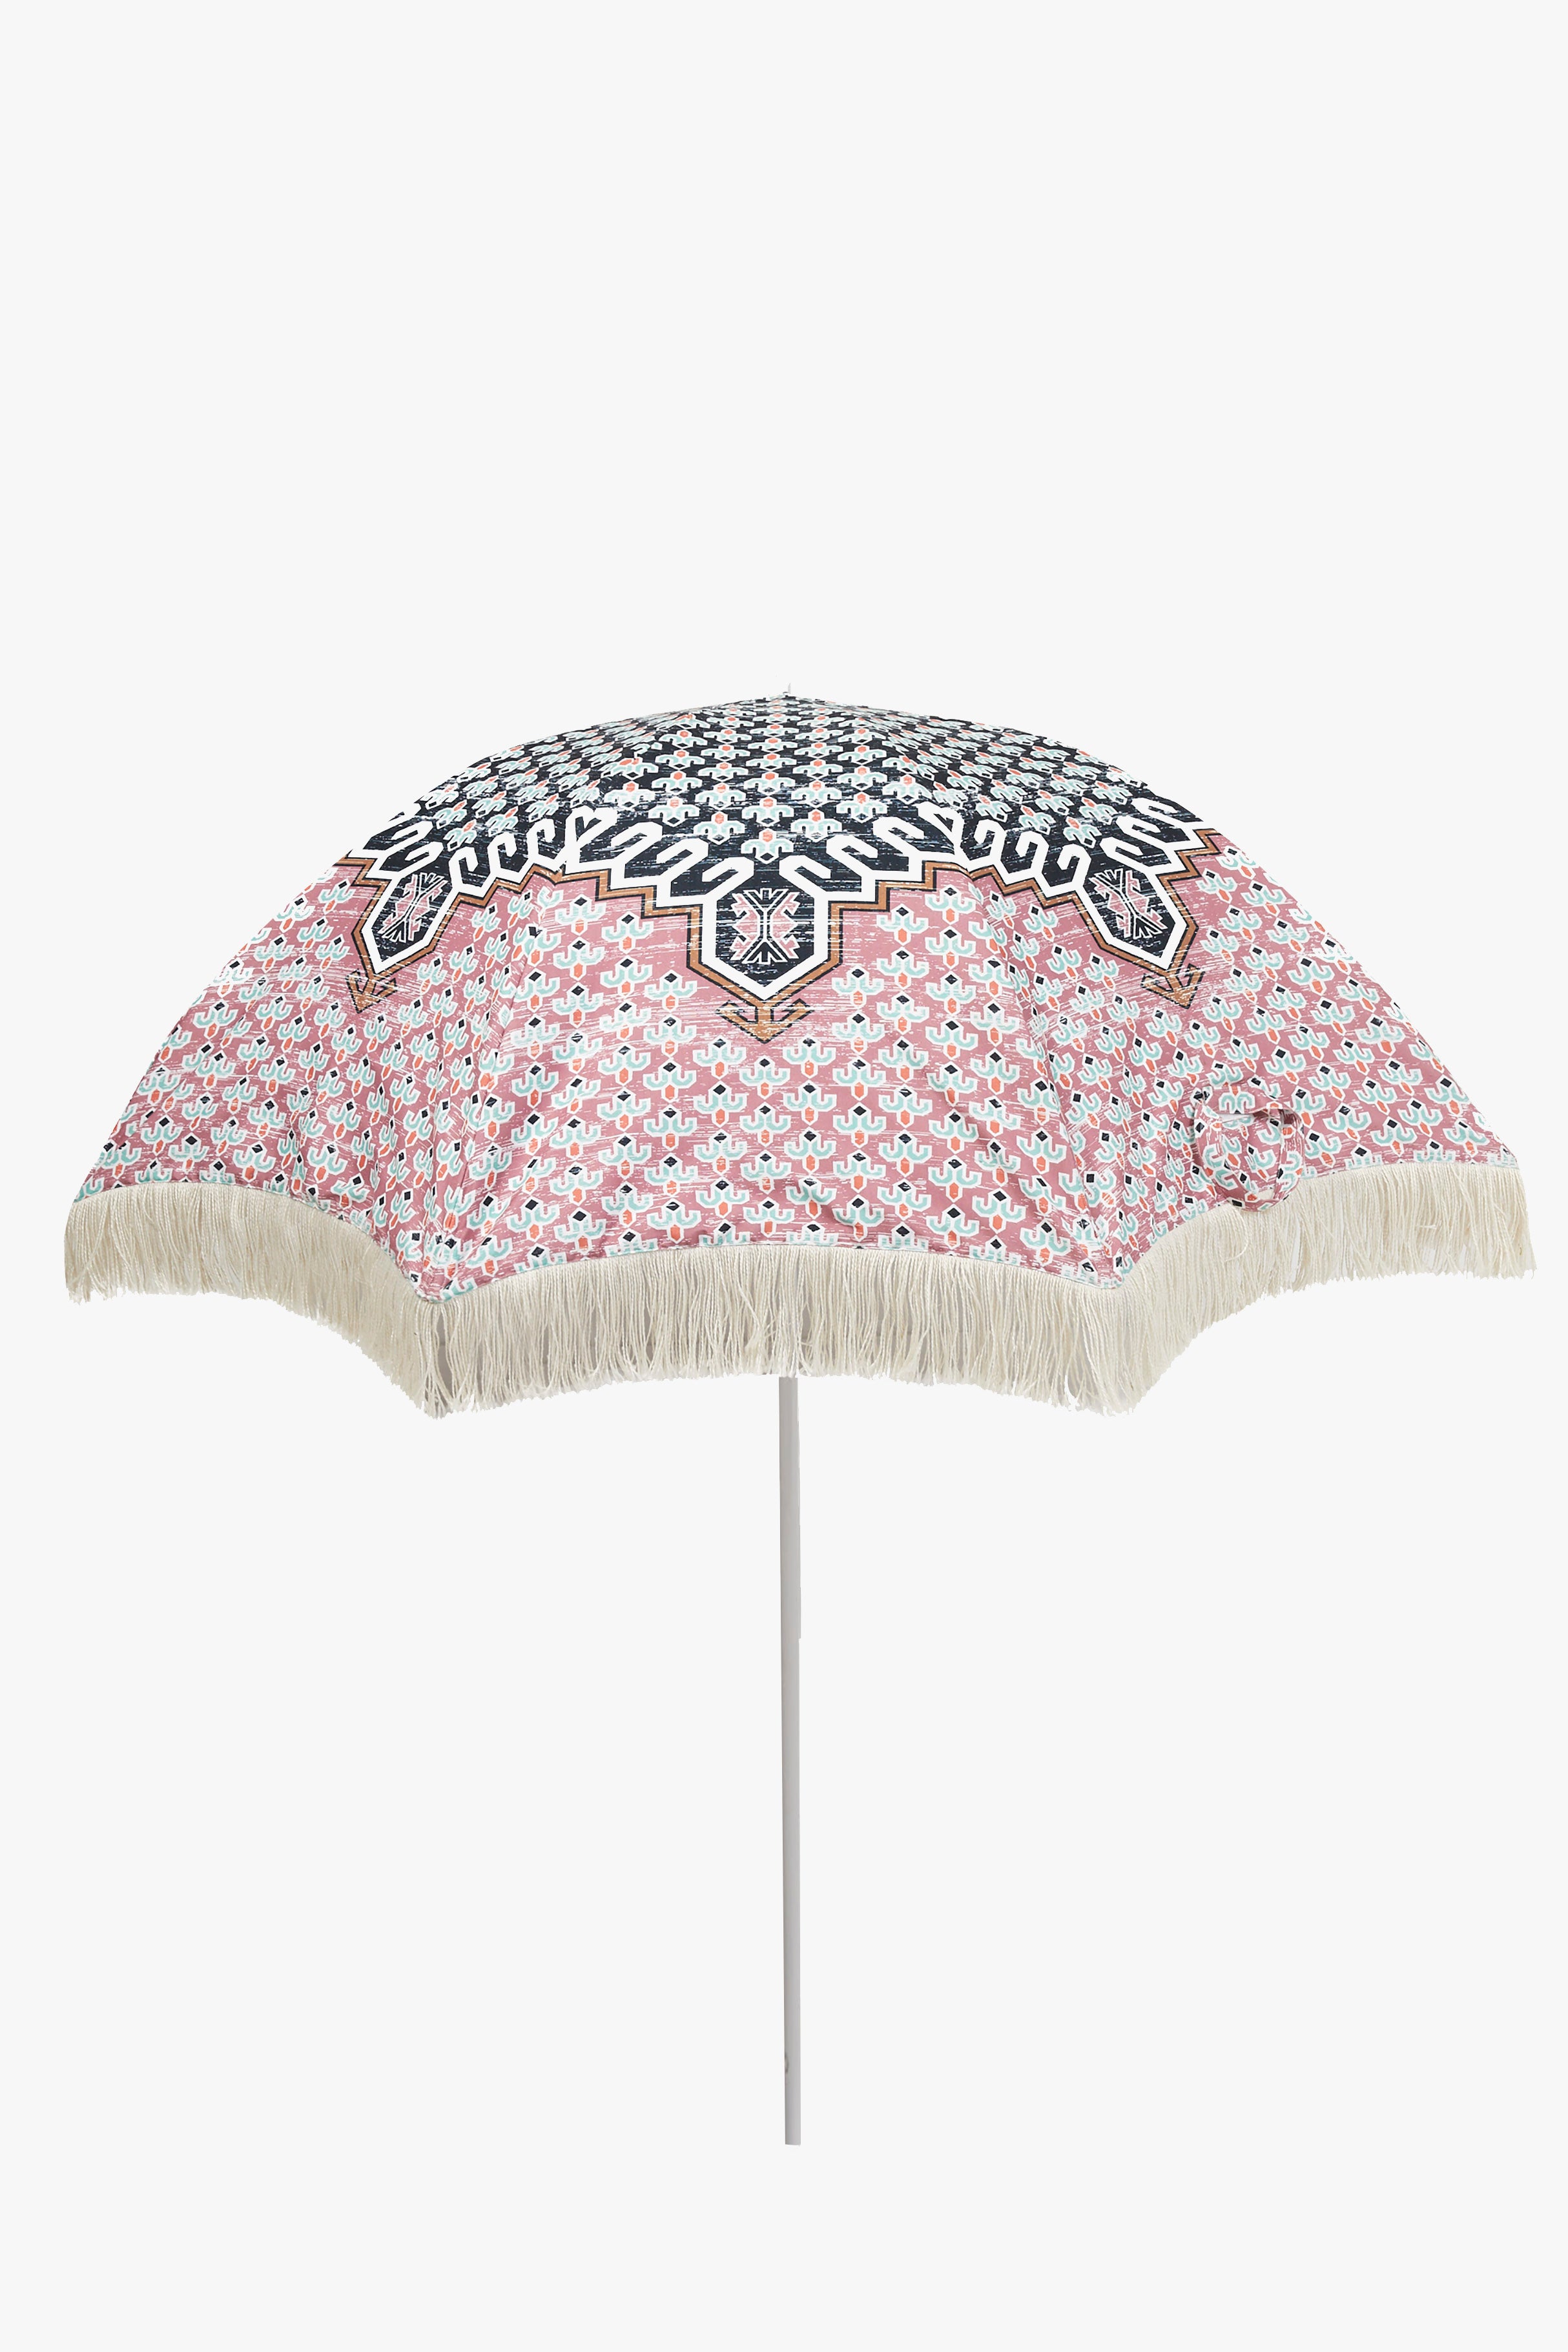 French Connection - Poppy Parasol | French Connection |  Parasols & Rain Umbrellas | One size - Pink - Size: OS